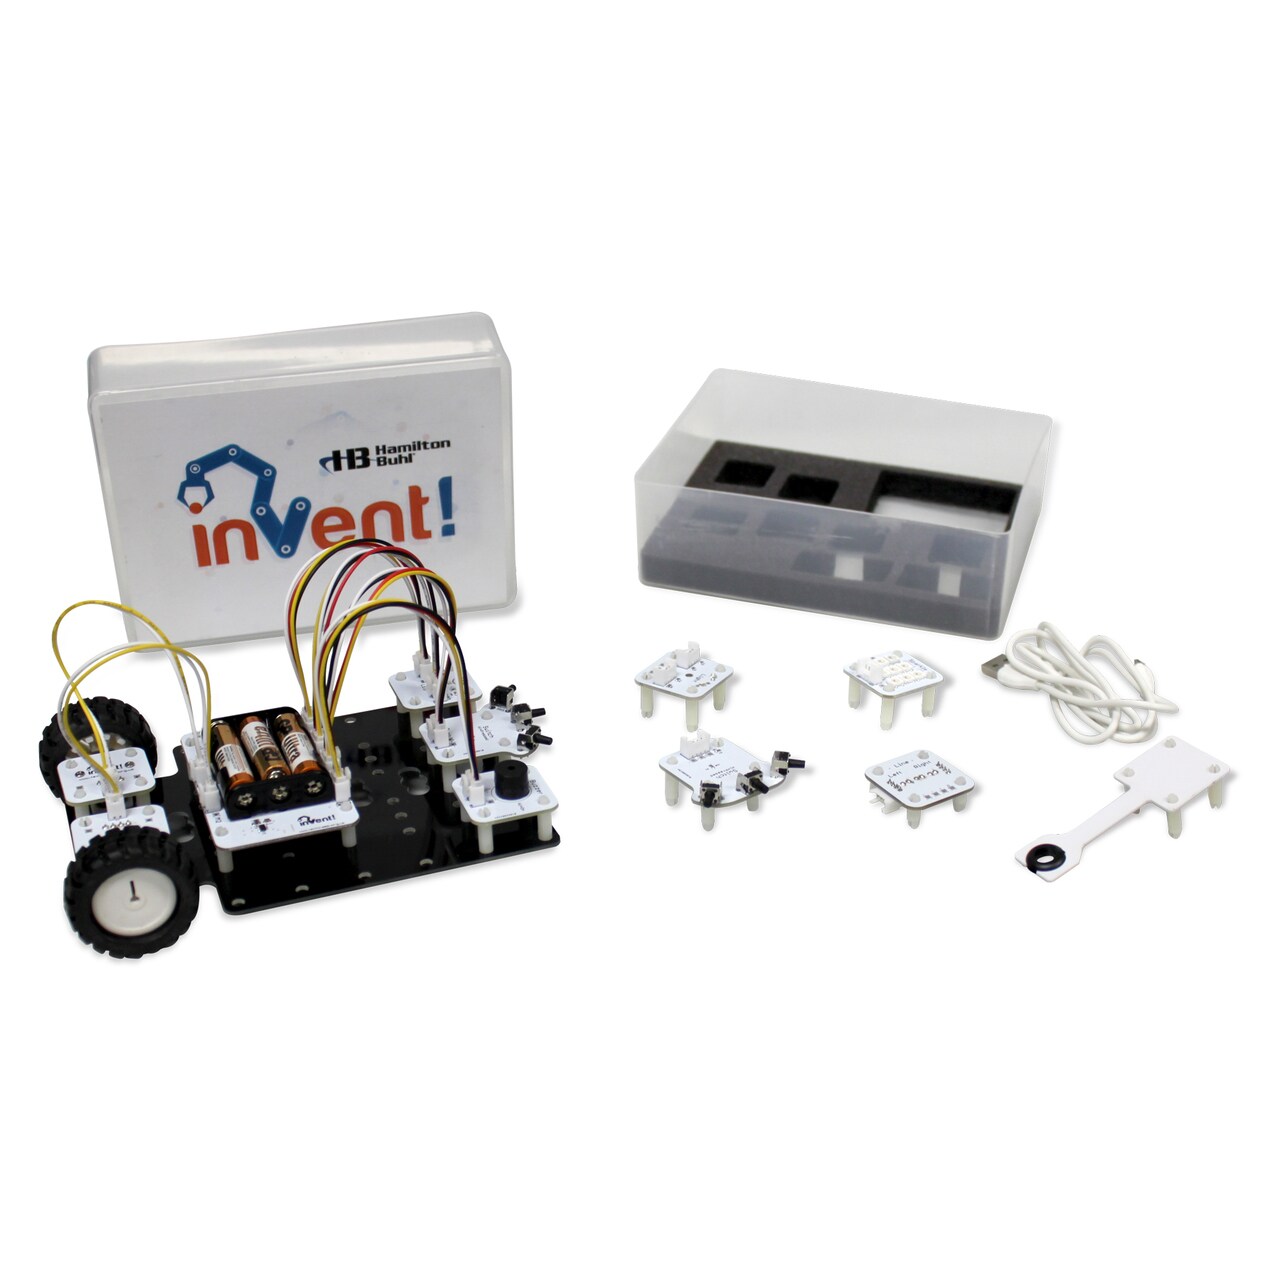 HamiltonBuhl HB Invent Kit - STEAM Education Robot Assembling and Coding